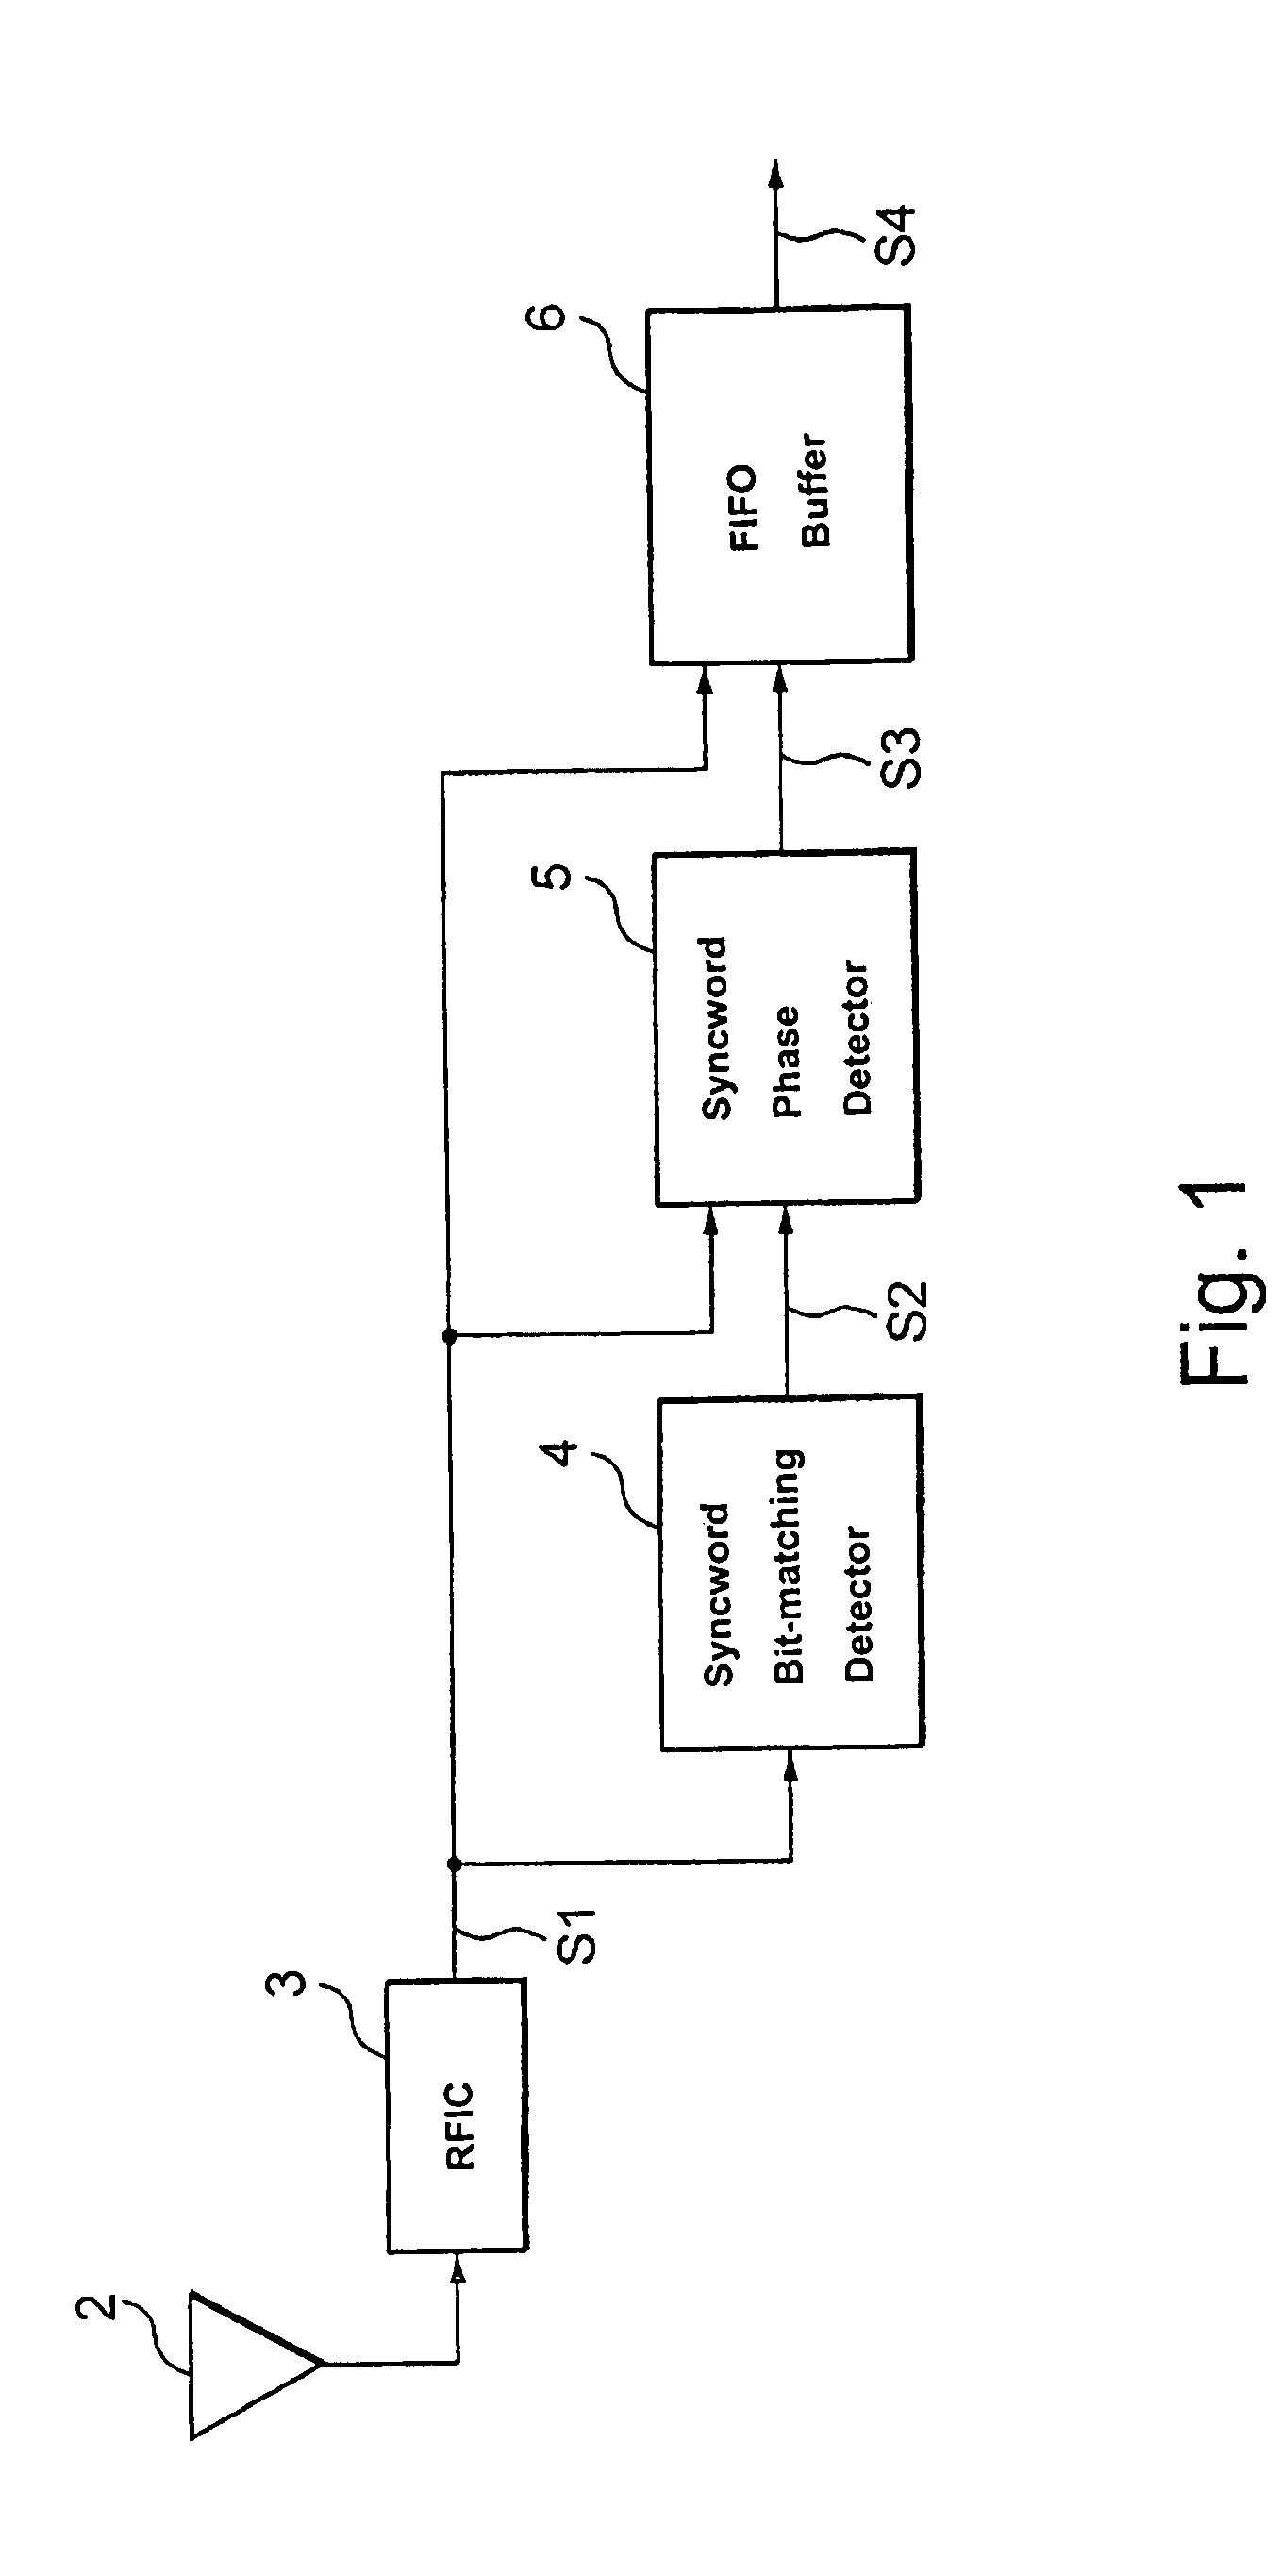 Syncword detecting circuit and a baseband signal receiving circuit